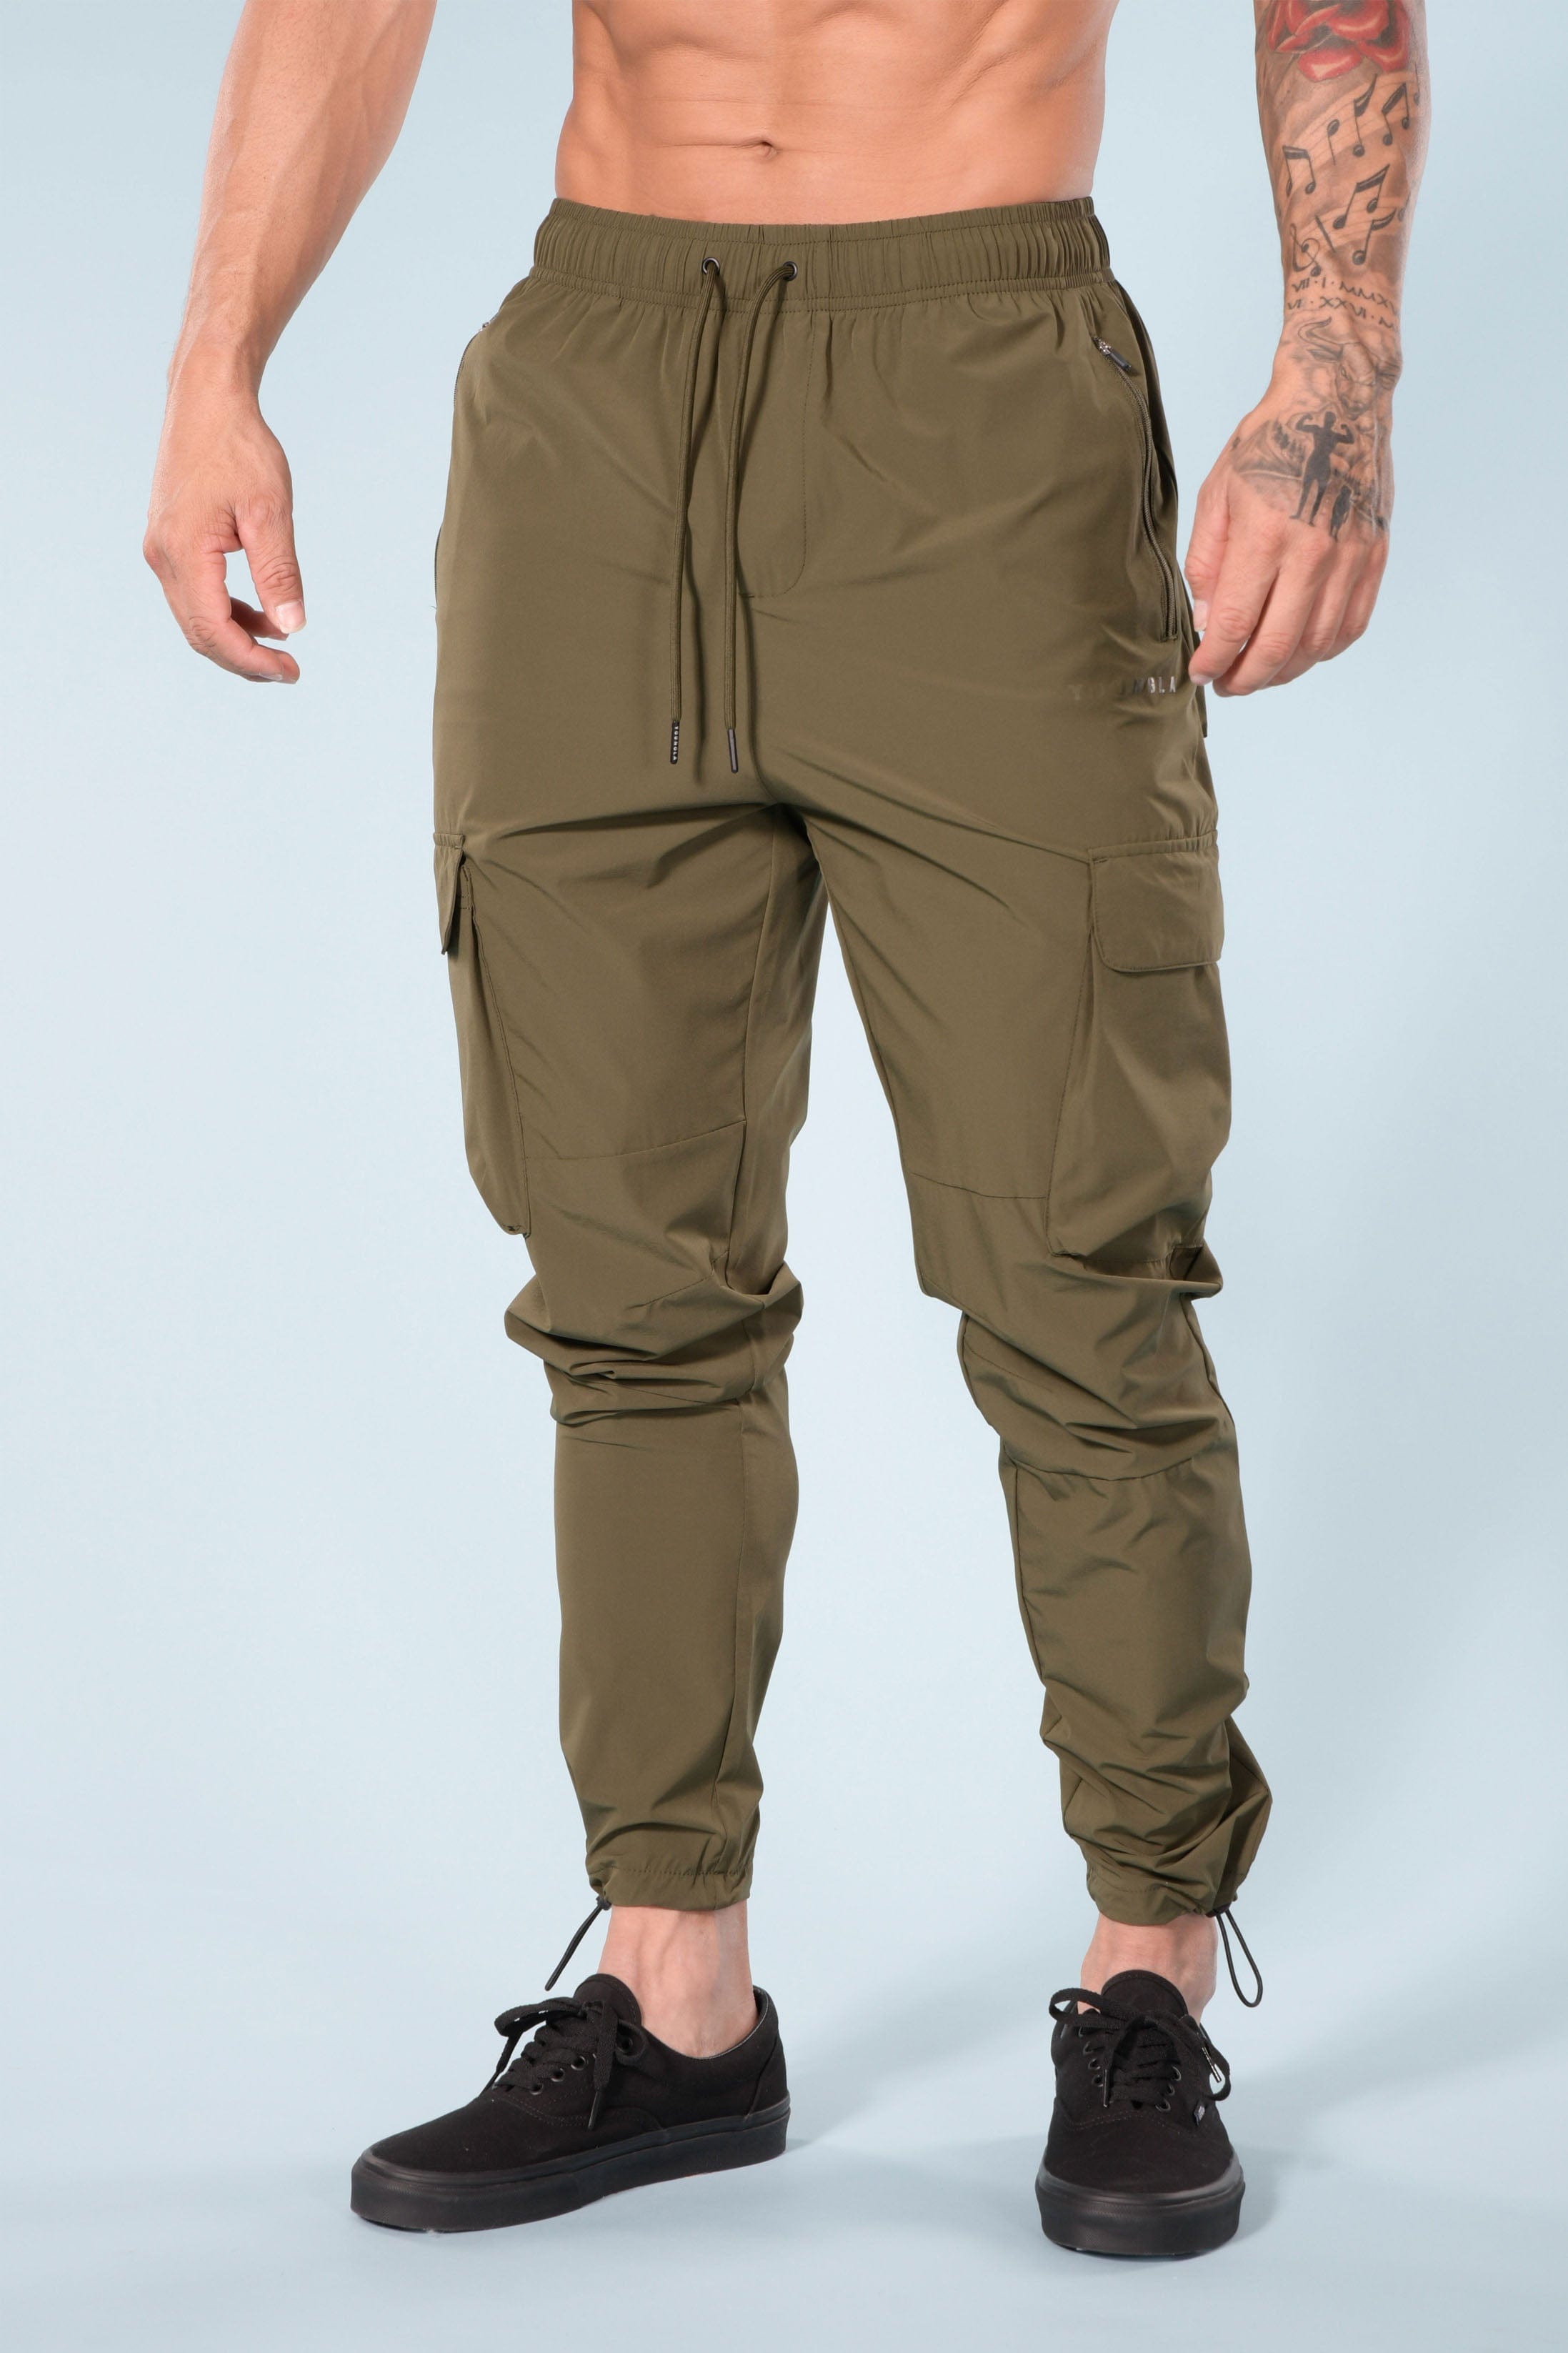 Young La joggers mens L white cargo taperd drawstring camoflauge